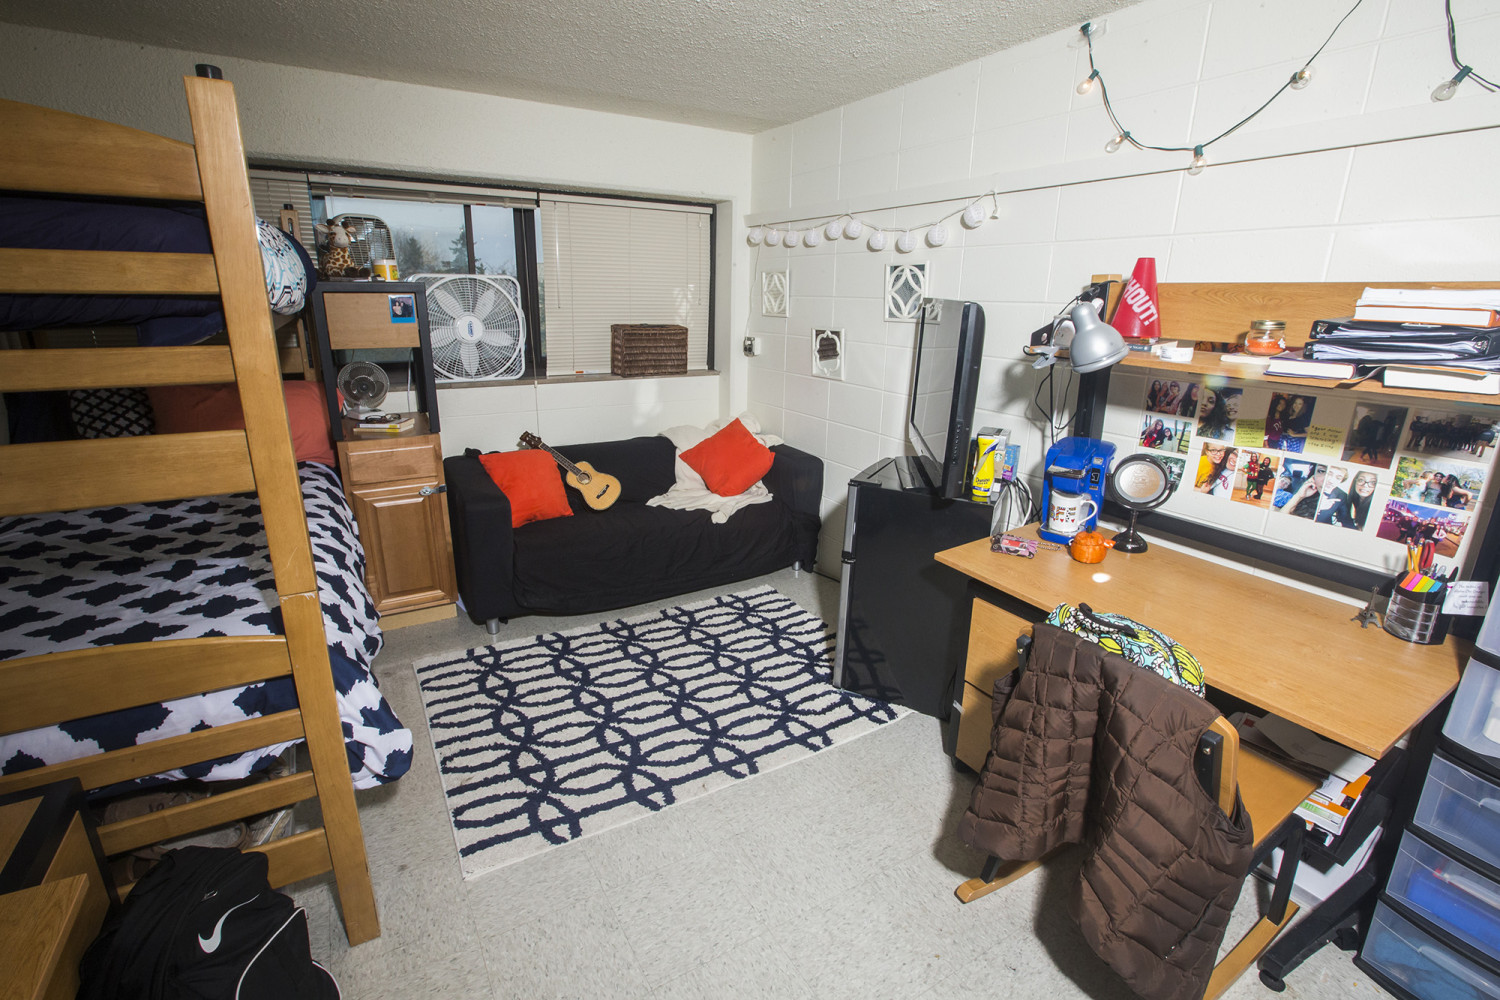 A double room in Johnson Hall.